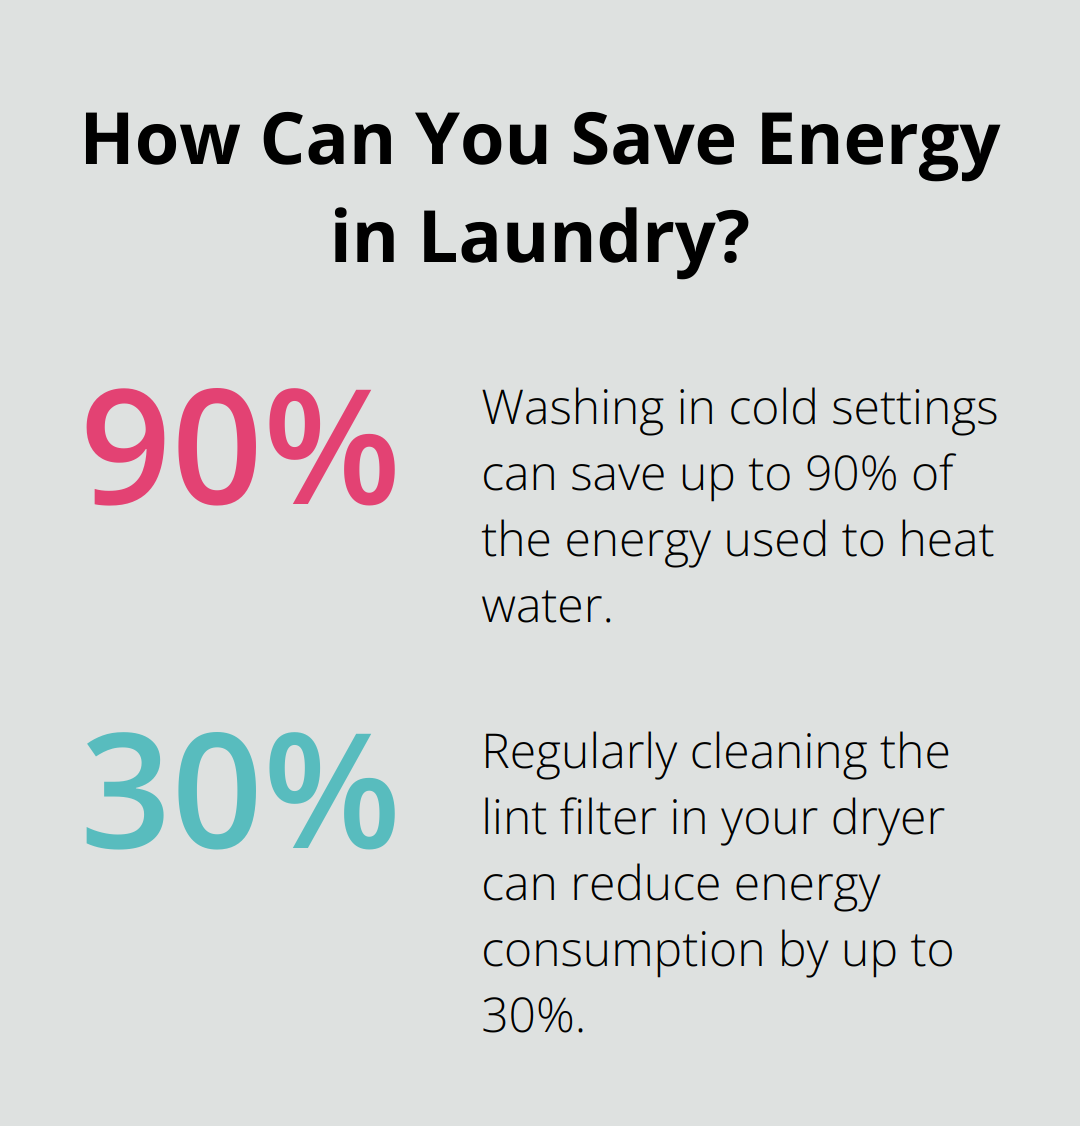 Fact - How Can You Save Energy in Laundry?